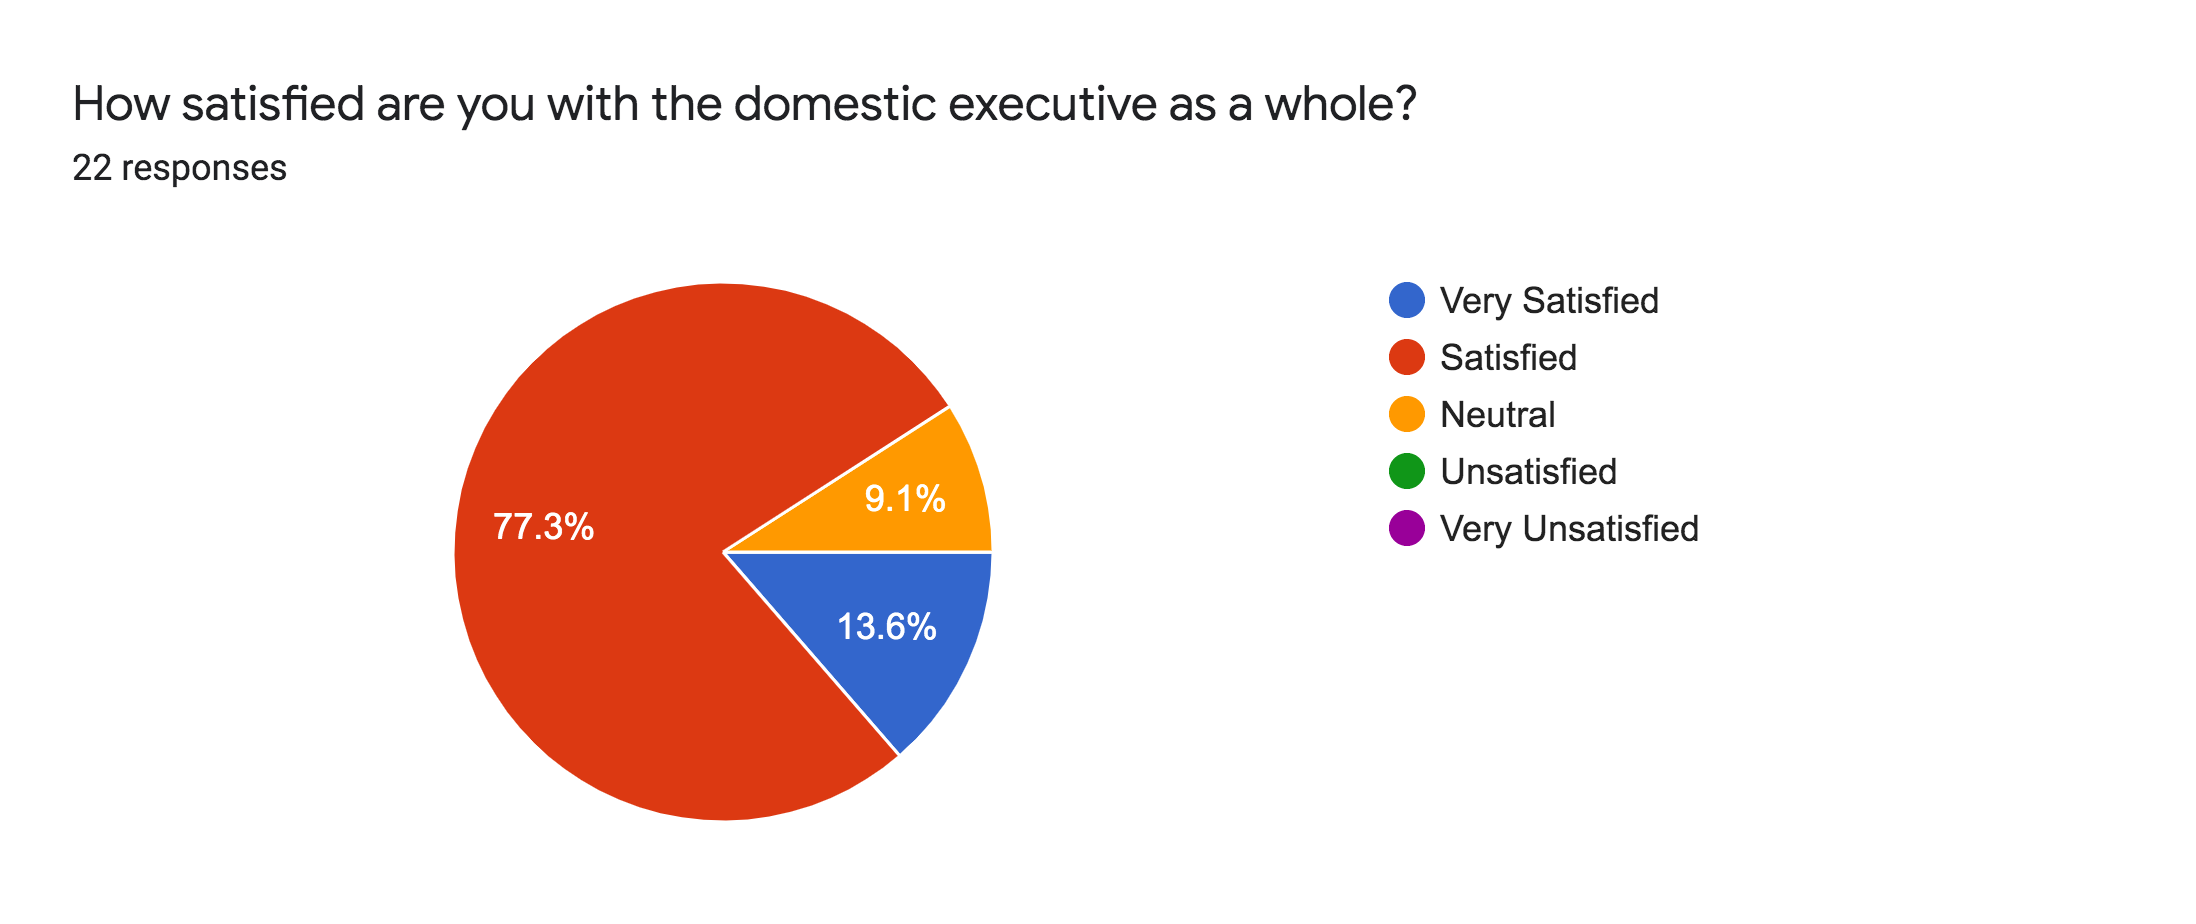 Forms response chart. Question title: How satisfied are you with the domestic executive as a whole?. Number of responses: 22 responses.